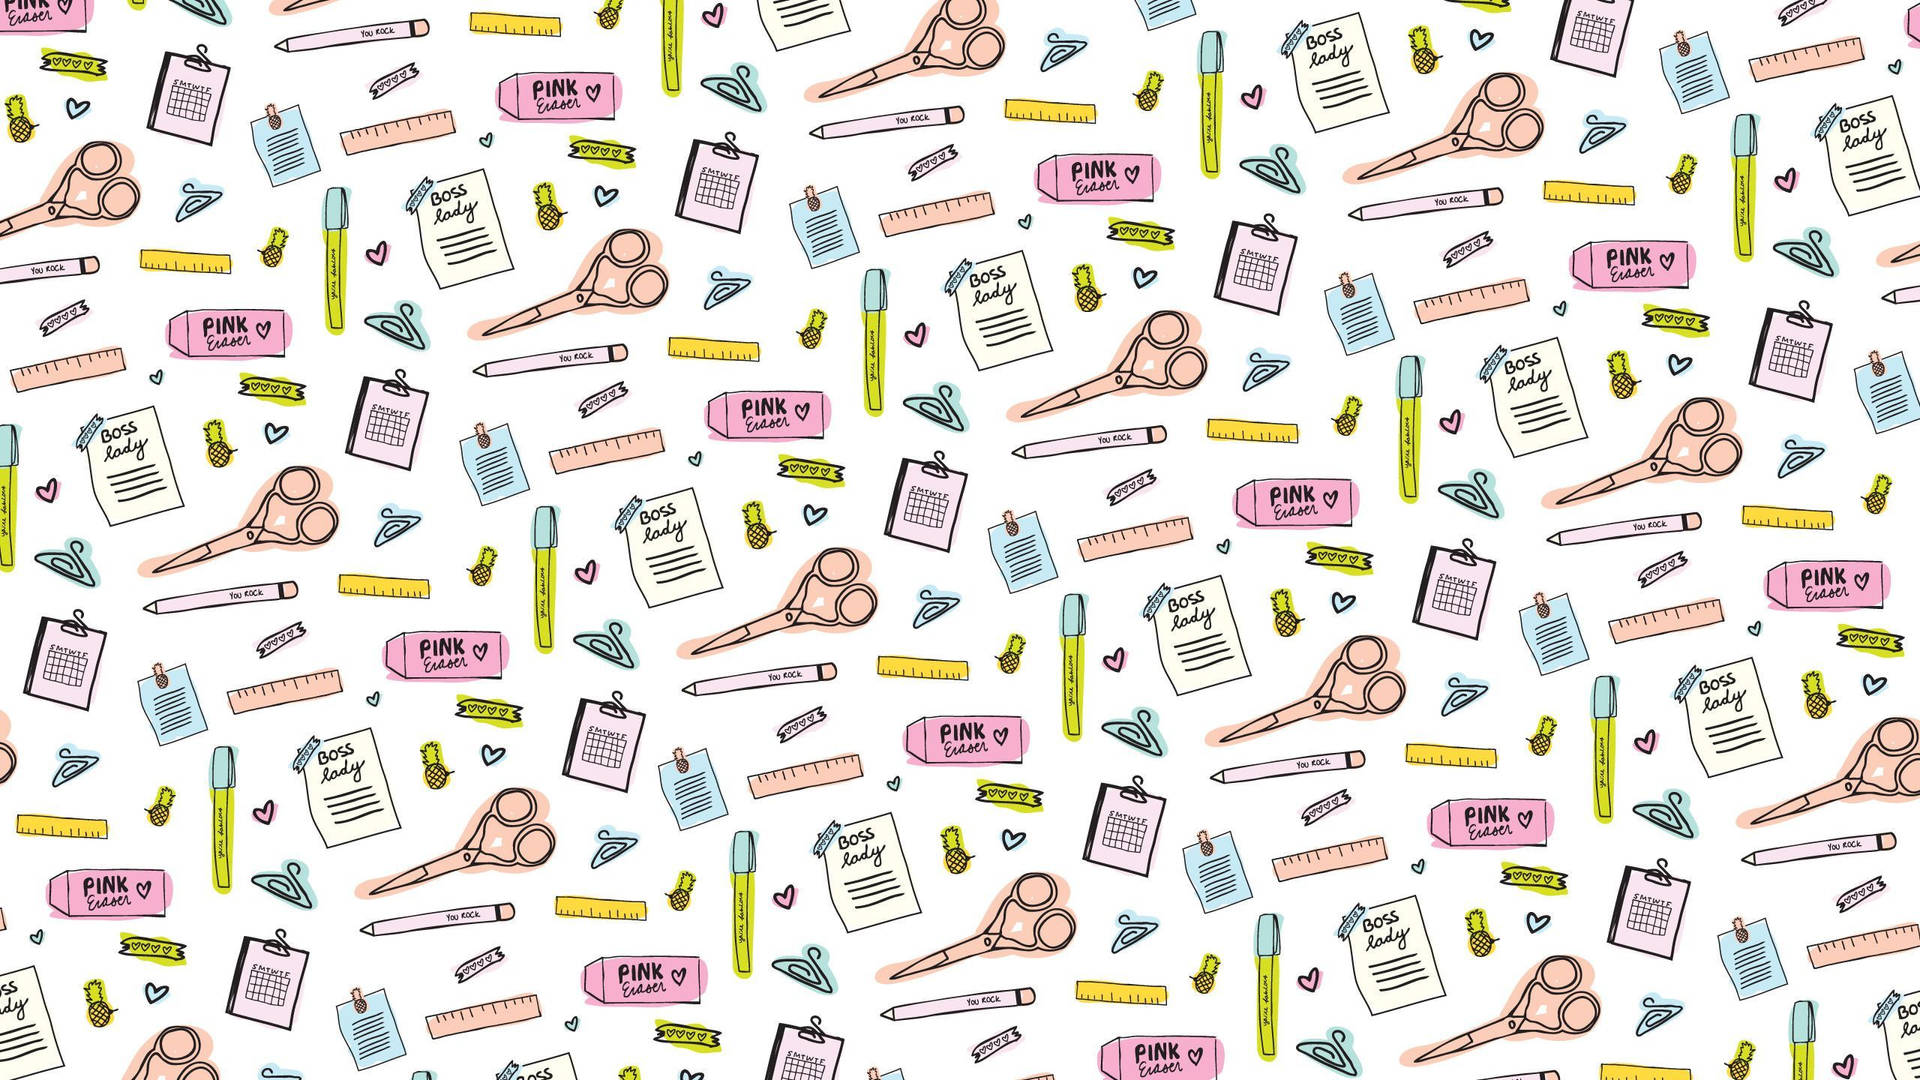 Cute Aesthetic Pc Stationery Pattern Wallpaper